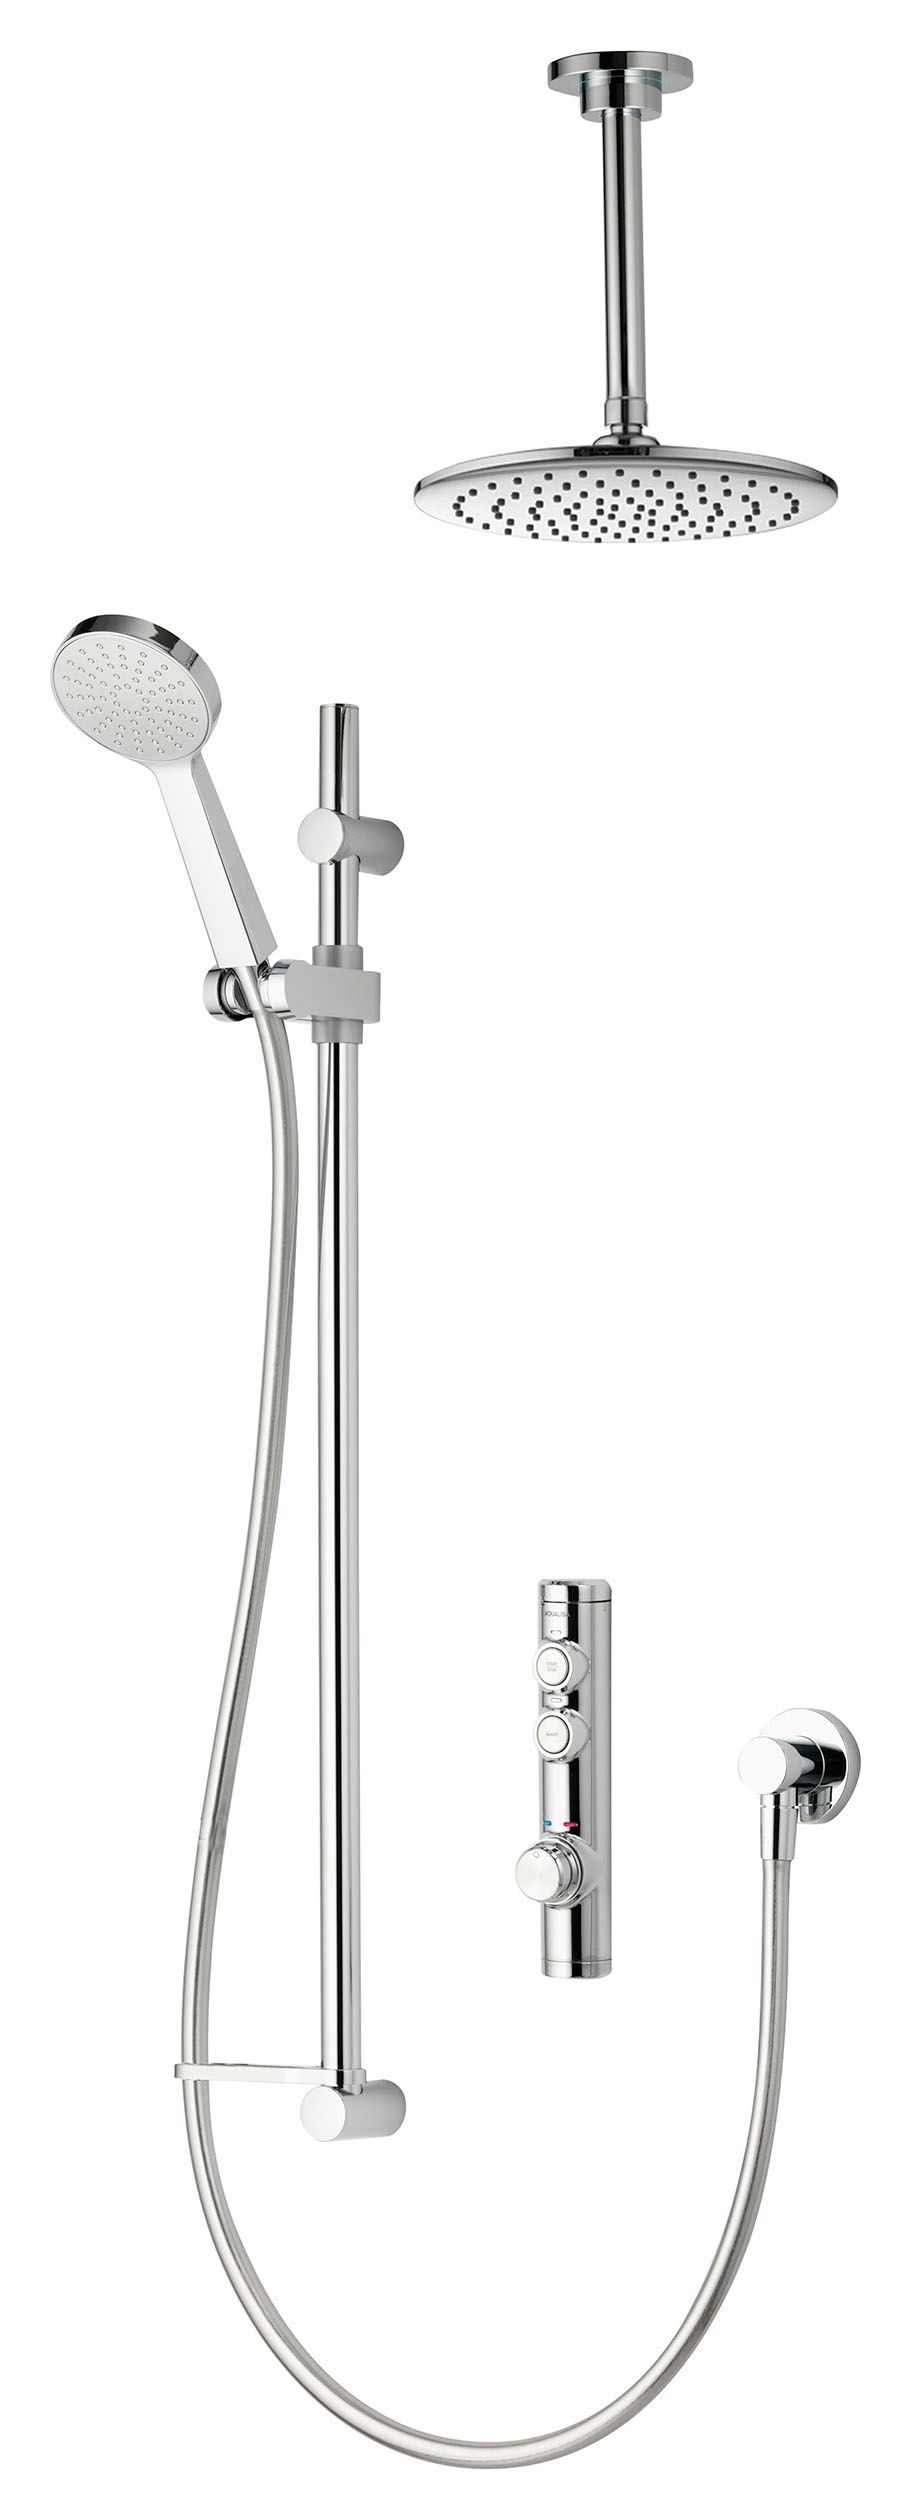 Image of Aqualisa iSystem Gravity Pumped Dual Outlet Digital Concealed Shower with Ceiling Drencher